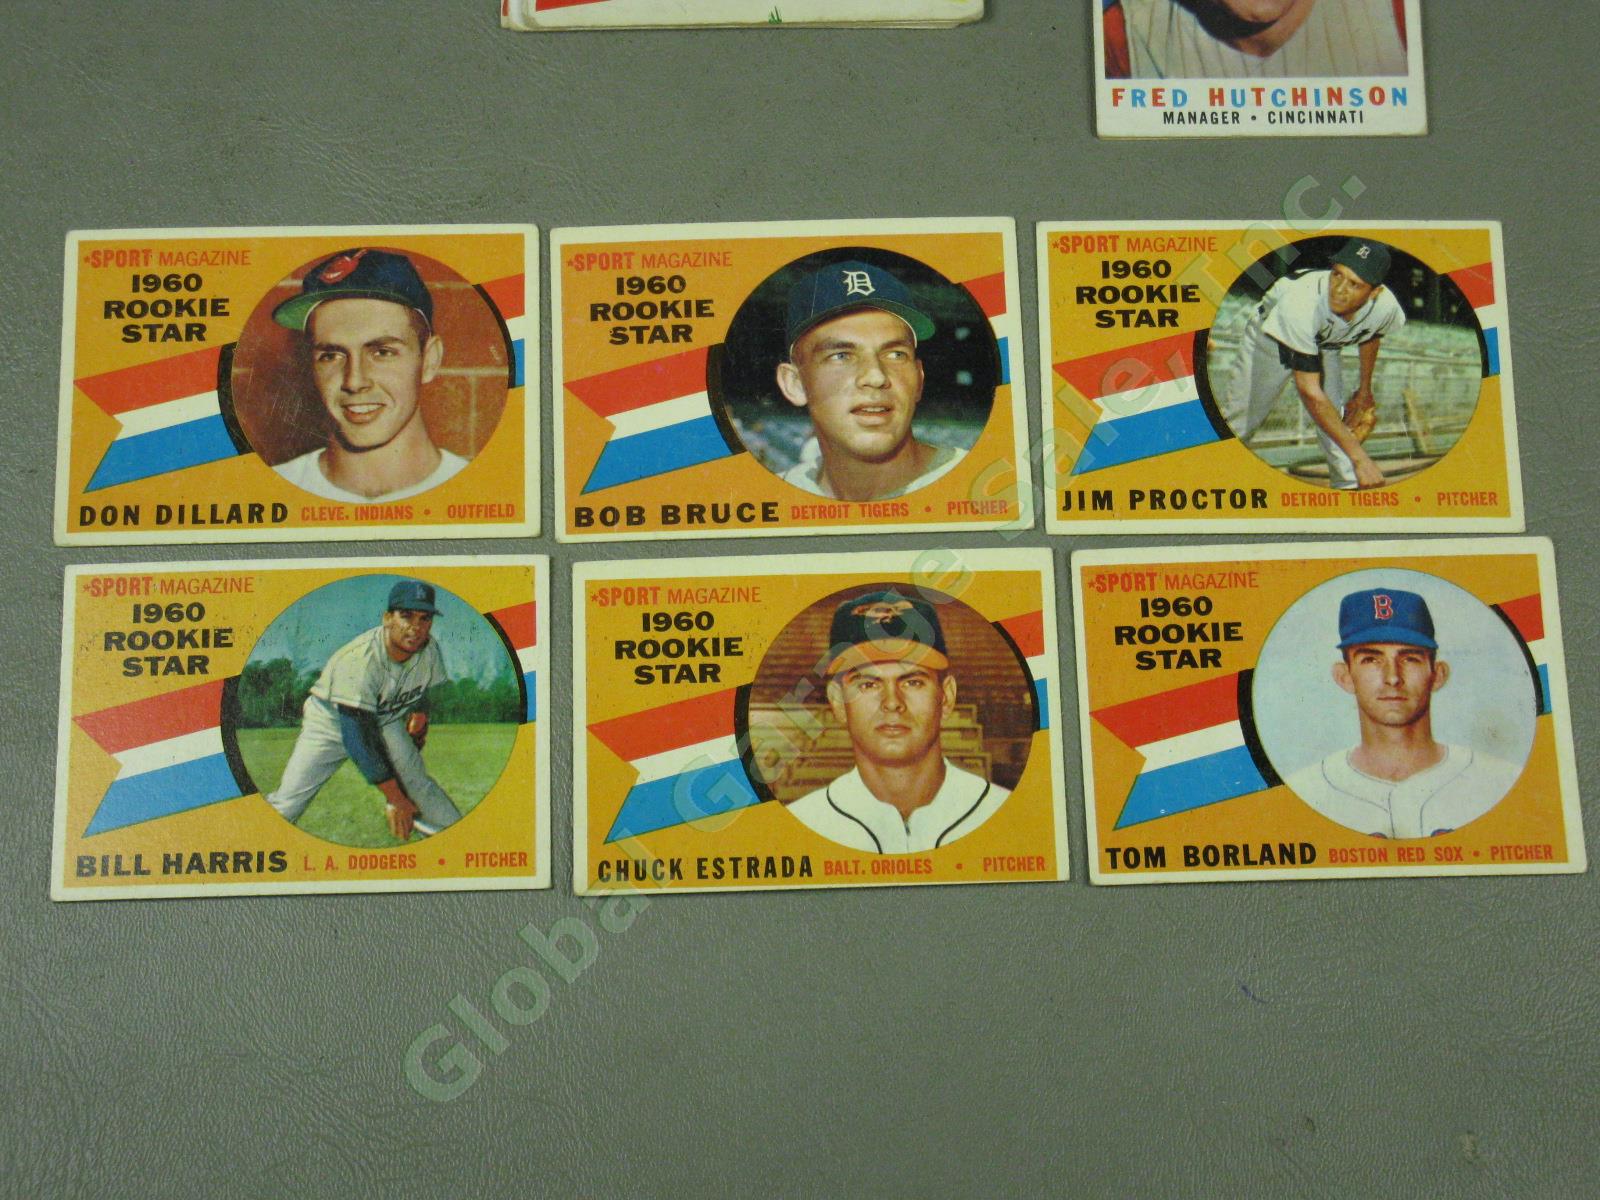 248 Vintage 1960 1960s Topps Baseball Card Lot Rookie Stars Teams Managers NR! 3